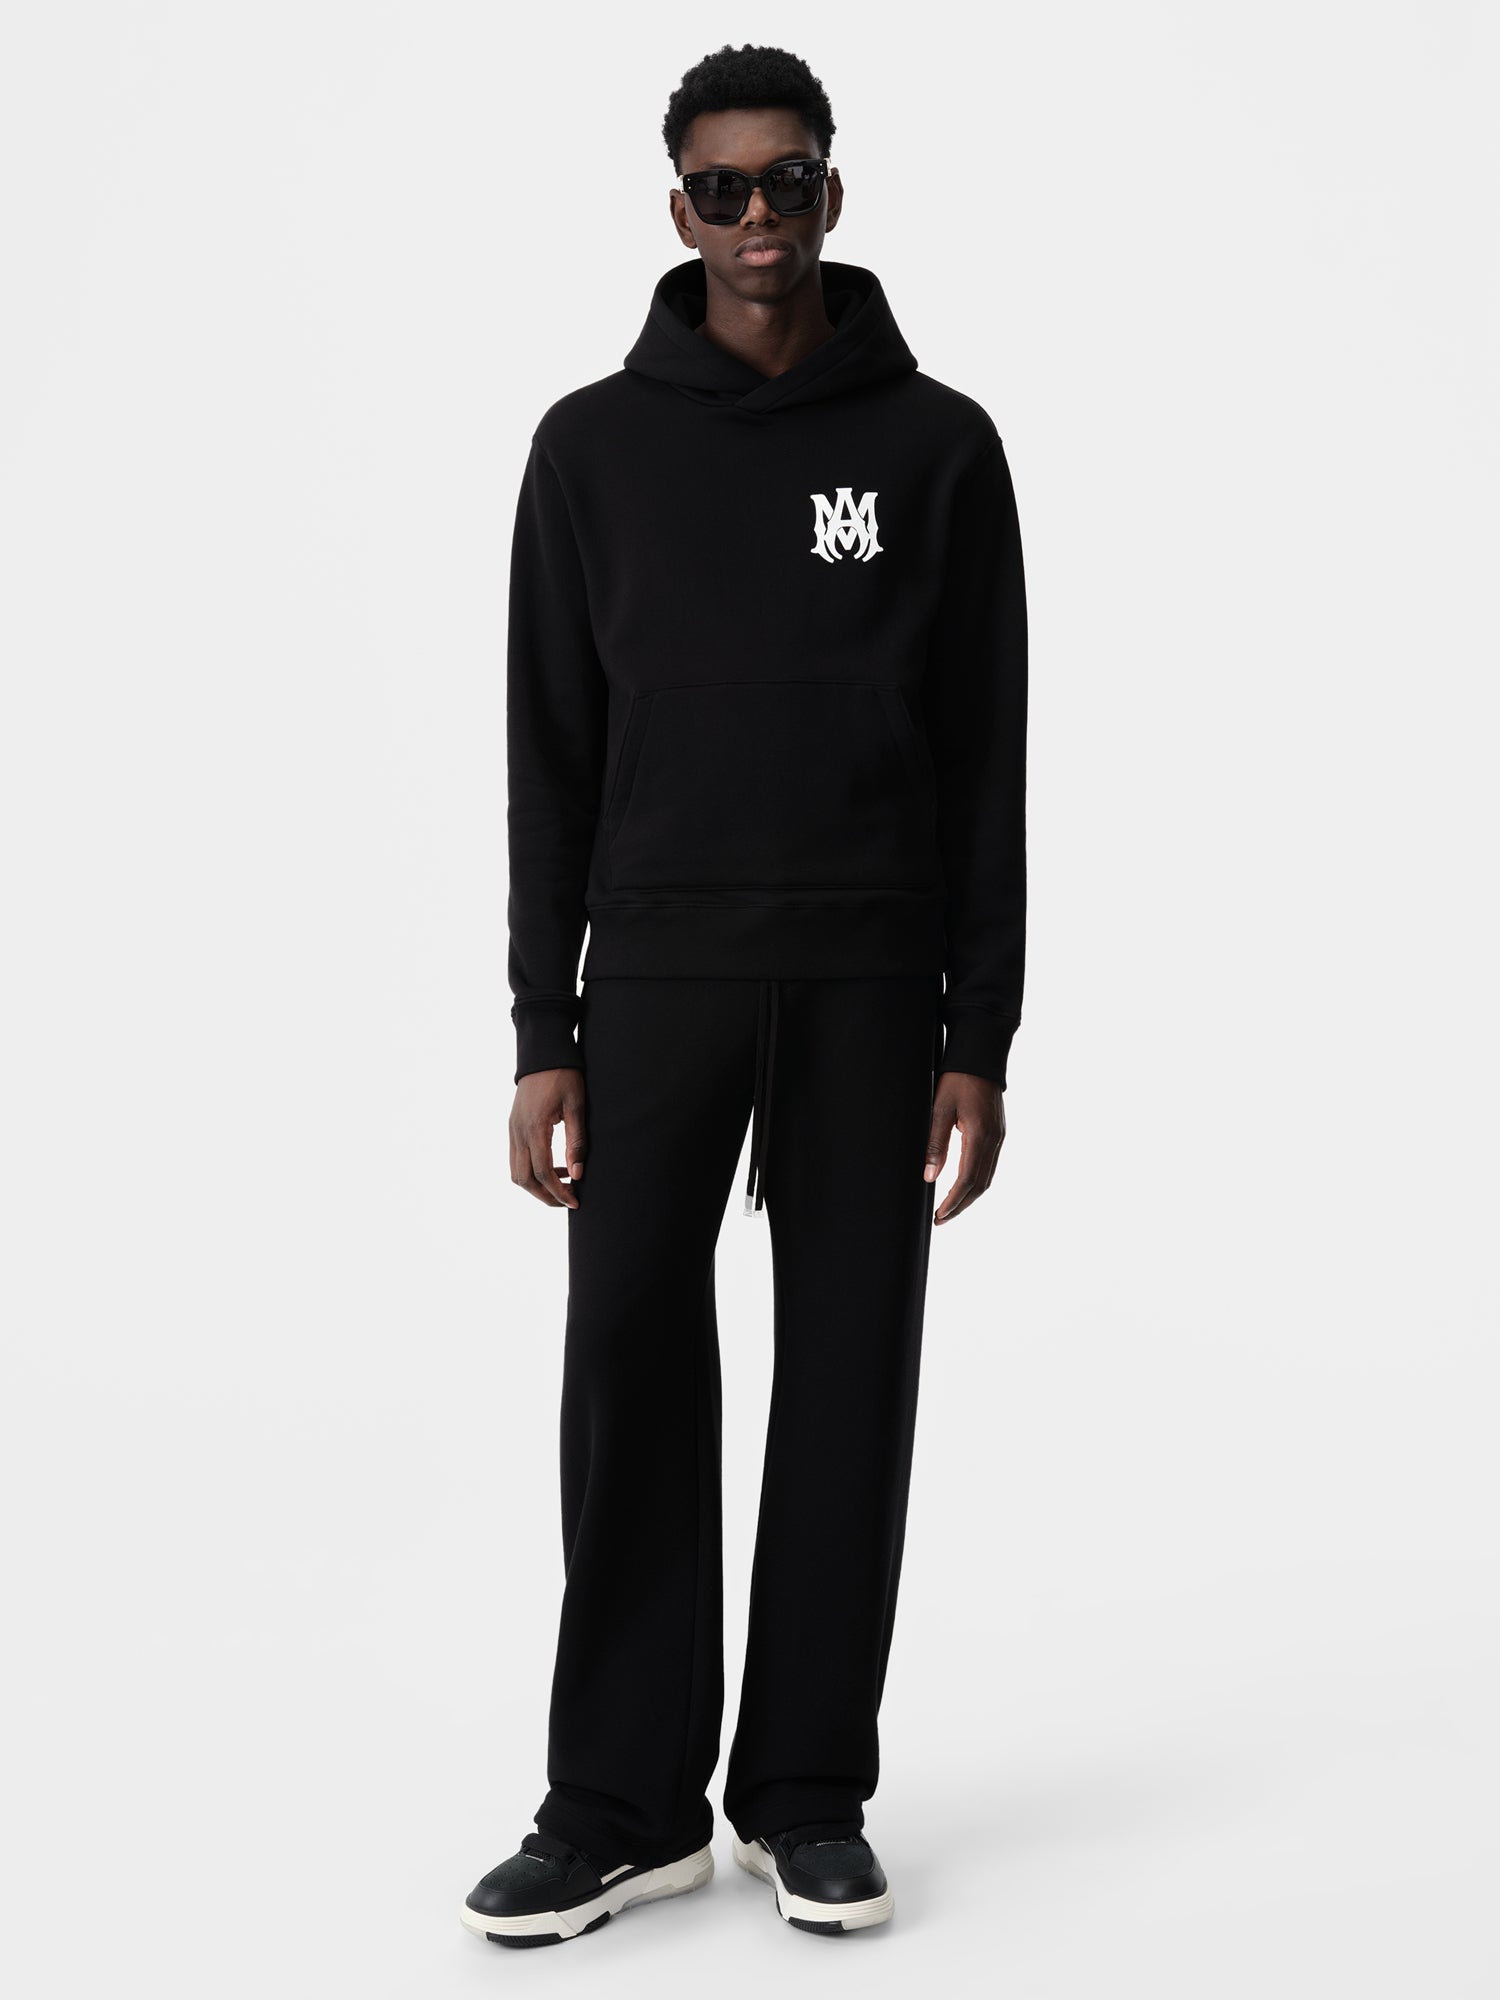 Product MA CORE LOGO HOODIE - Black featured image